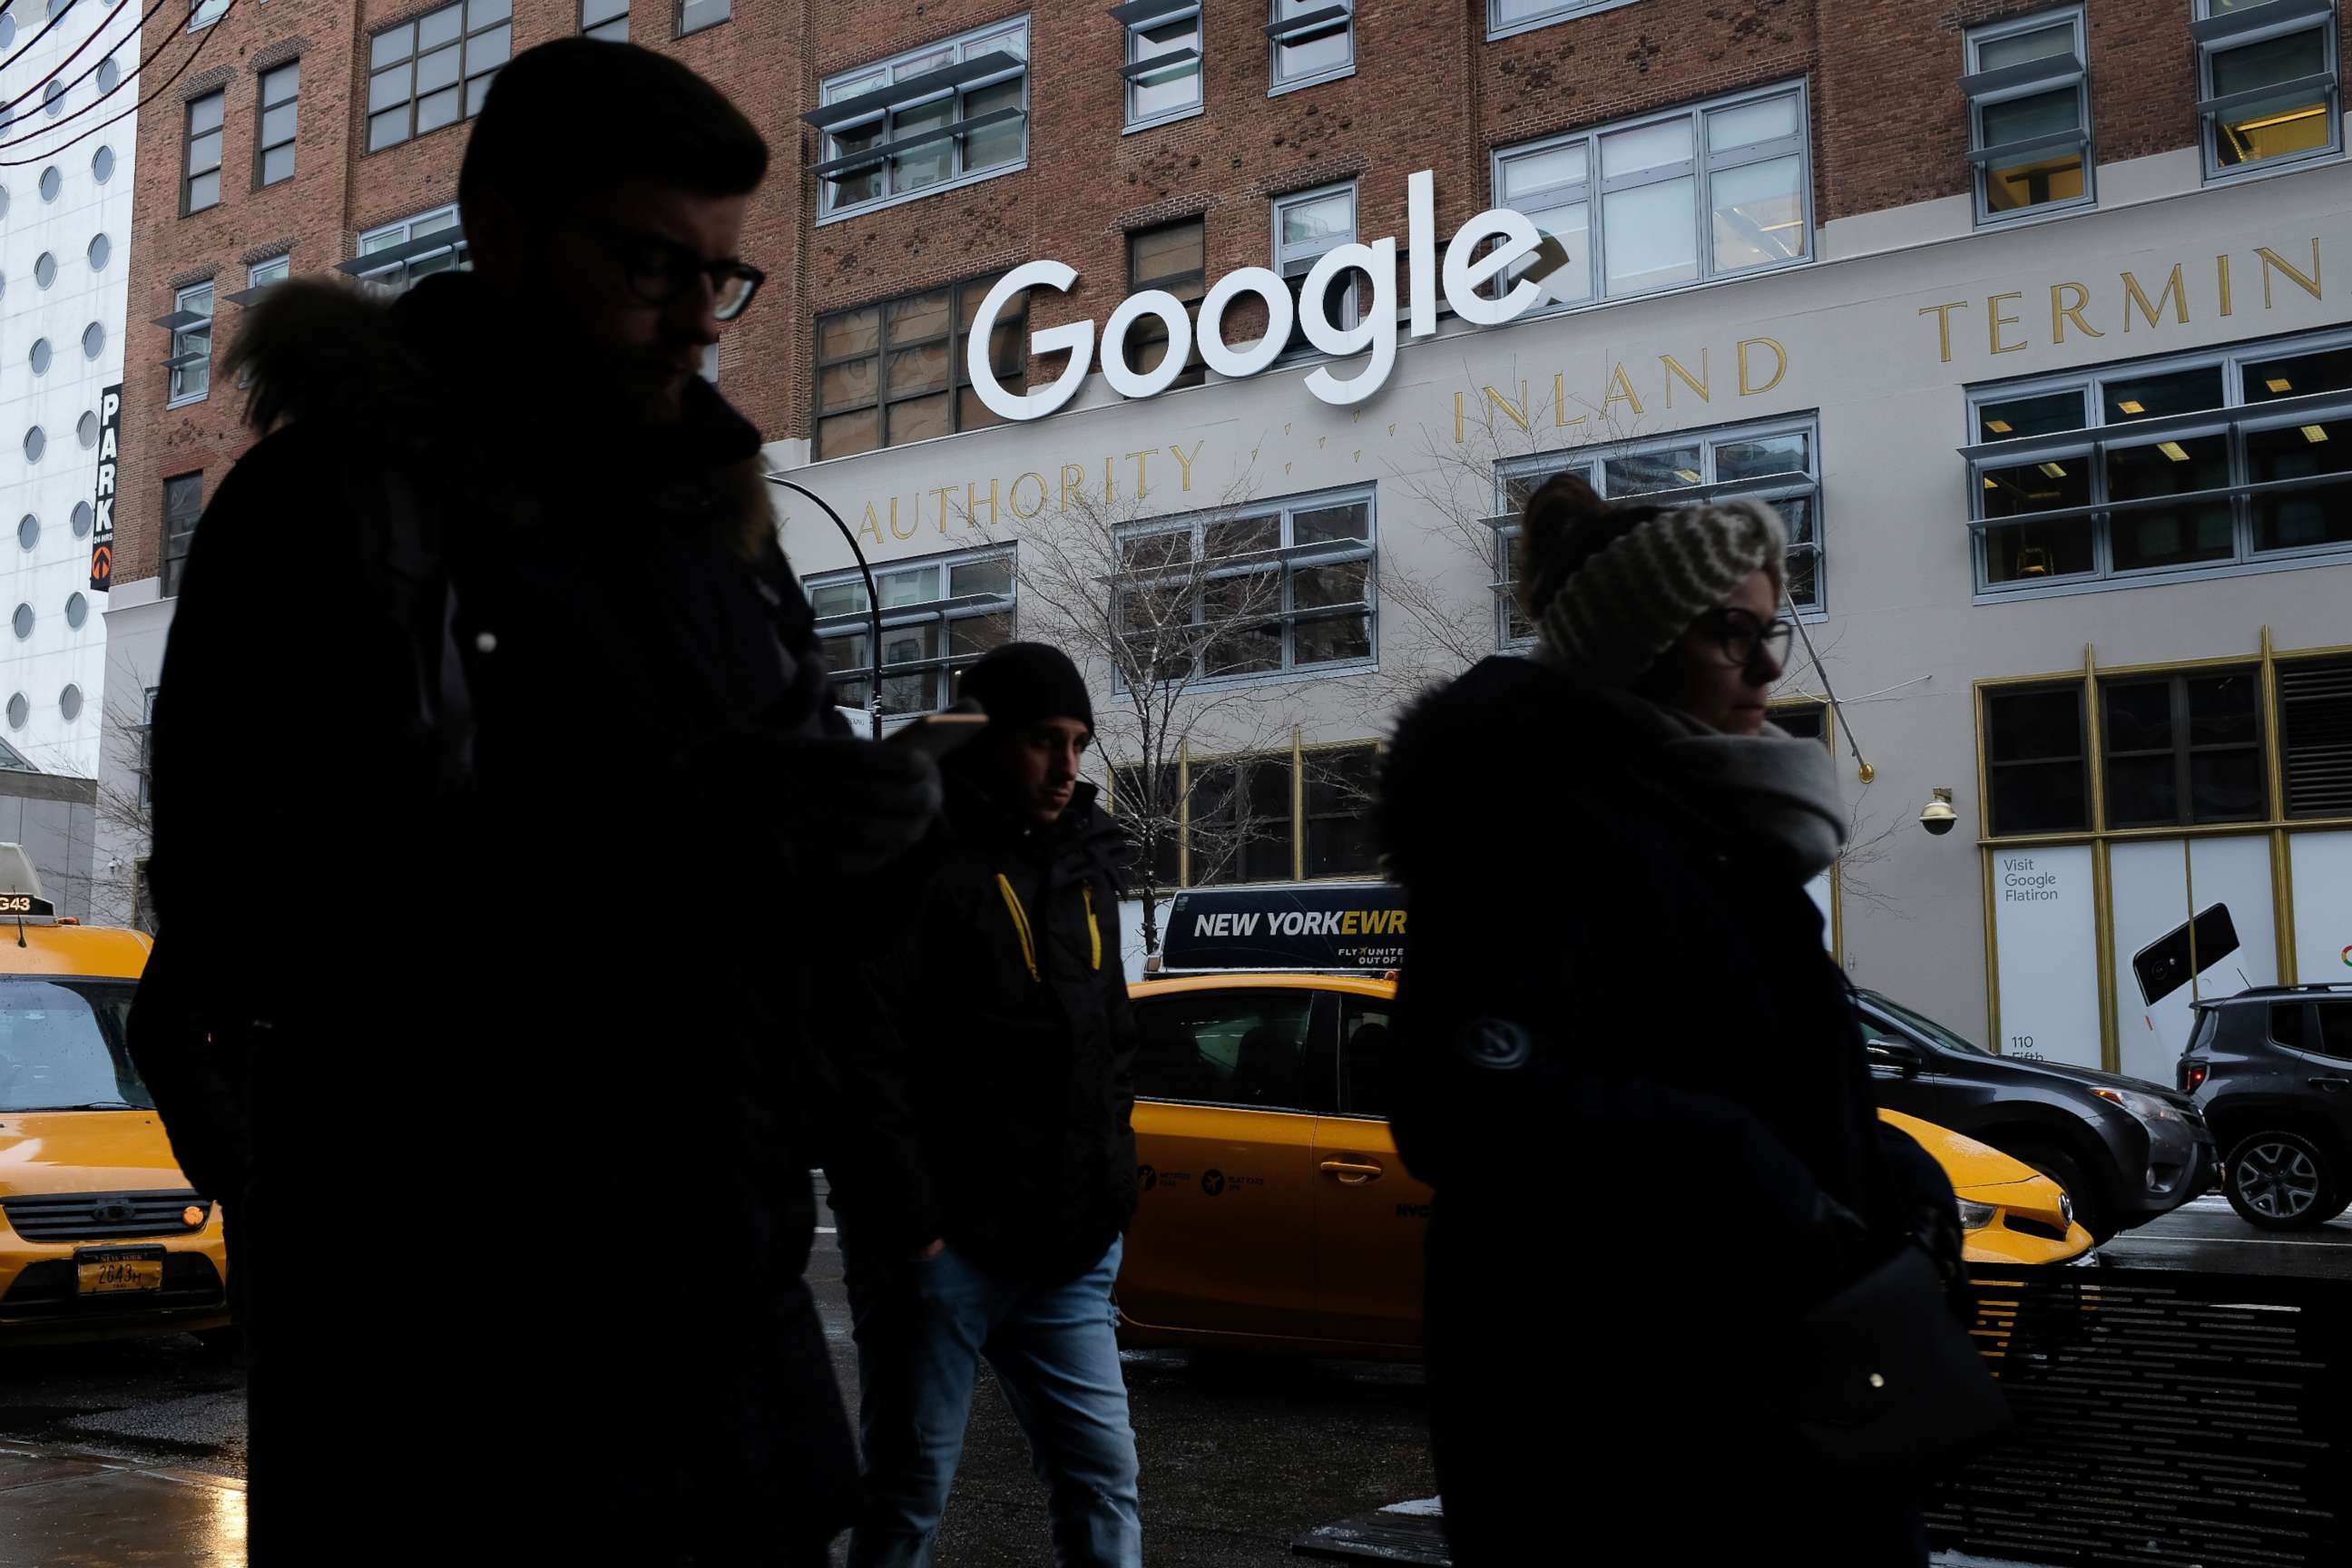 PHOTO: People walk past a Google office building on 9th Avenue in Chelsea district in New York, Dec. 30, 2017.